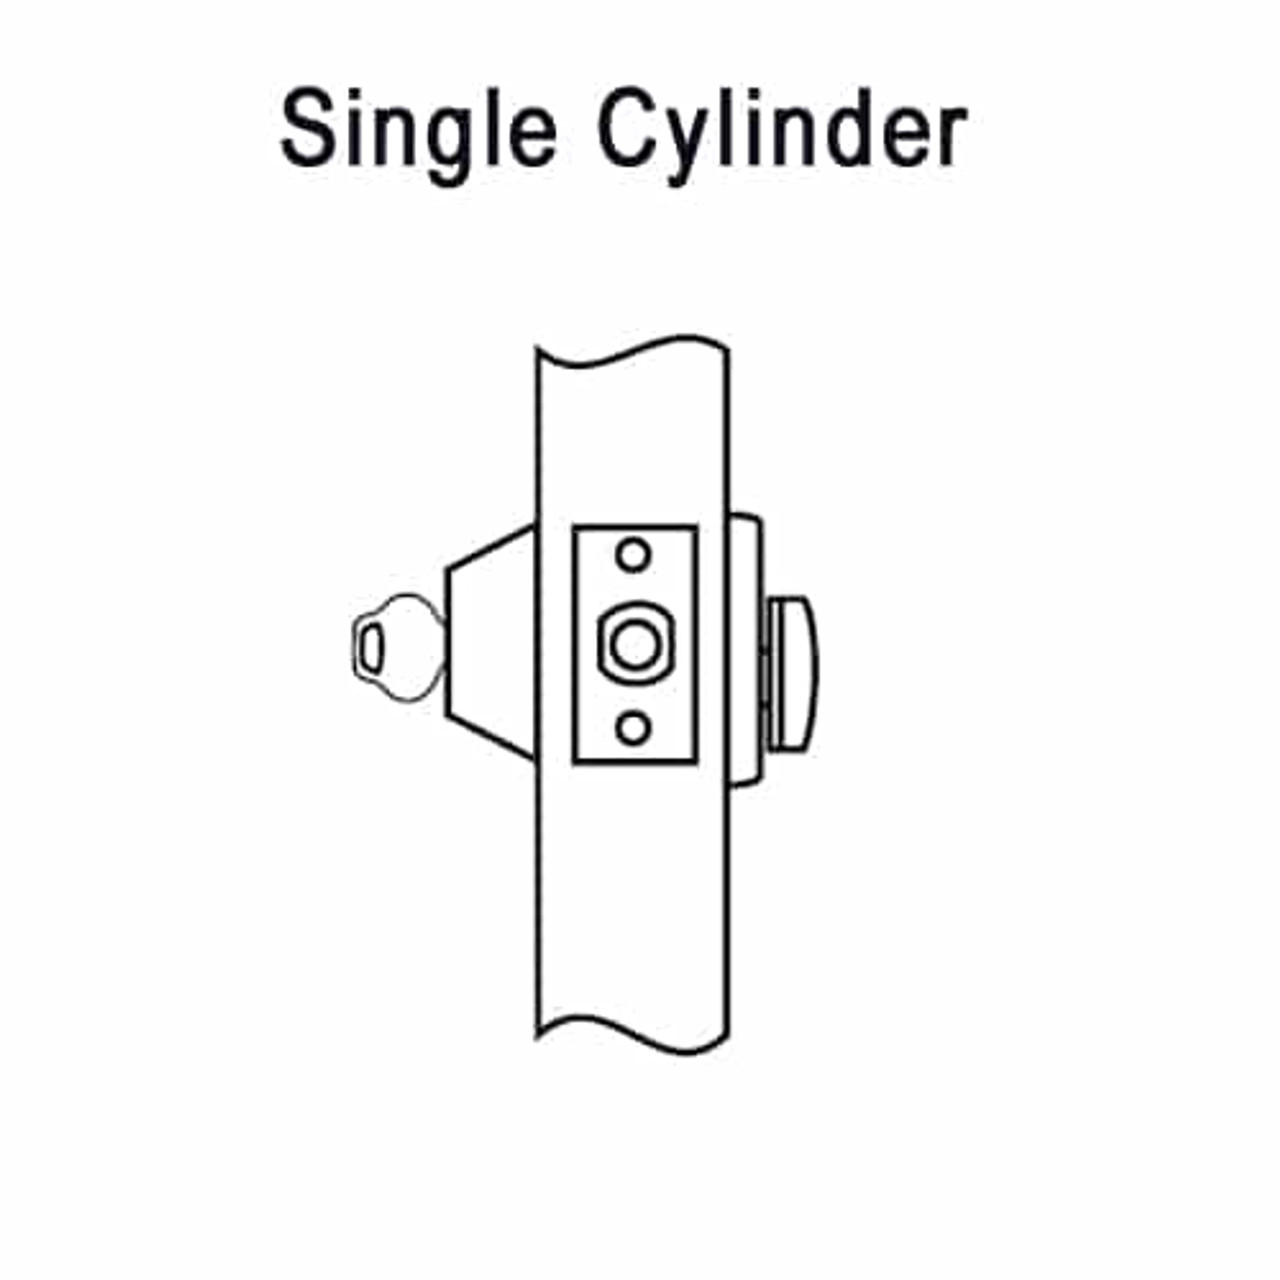 DL2213-613 Corbin DL2200 Series Cylindrical Deadlocks with Single Cylinder in Oil Rubbed Bronze